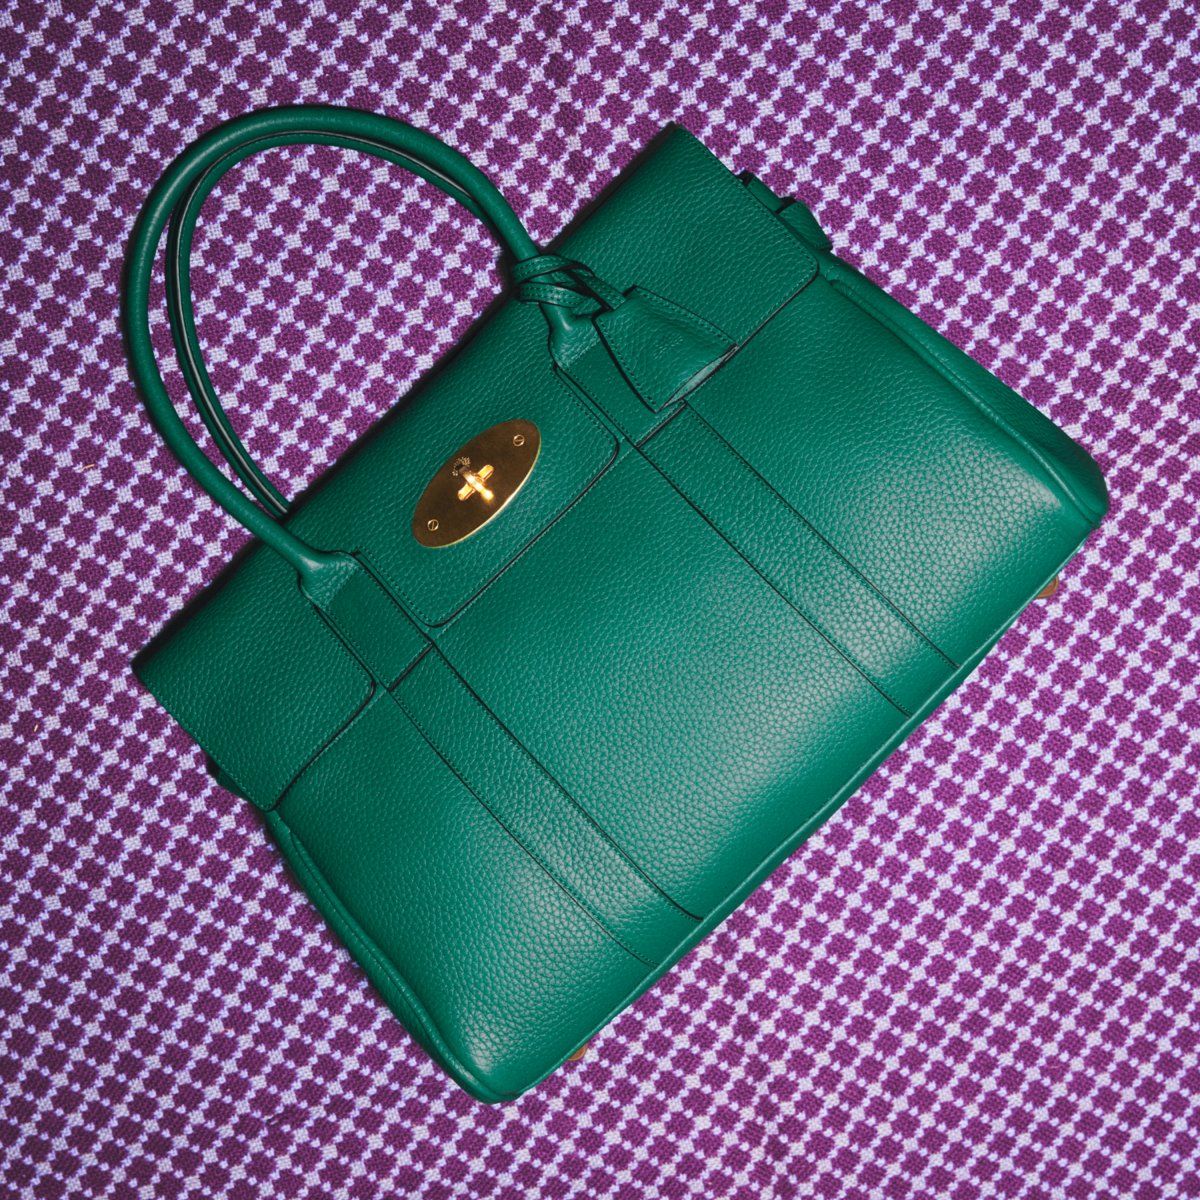 Mulberry Bayswater bag in green leather